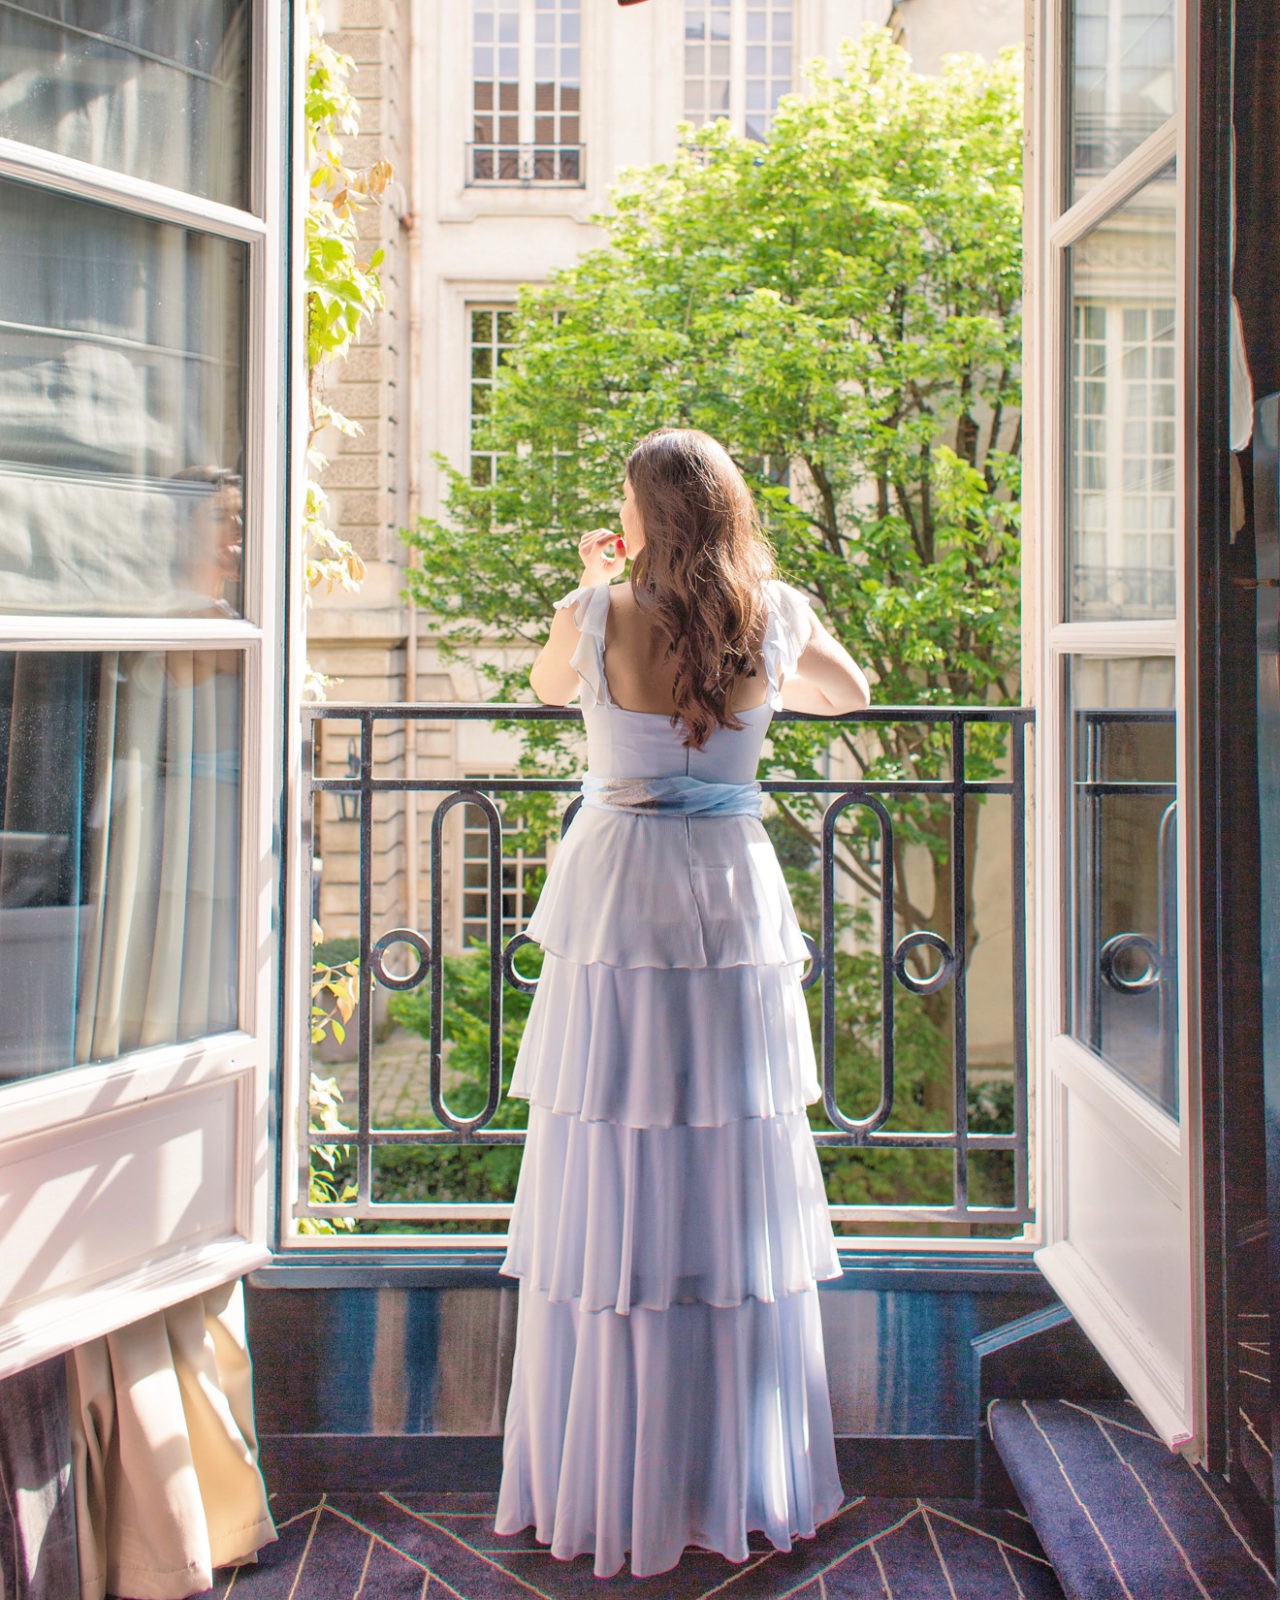 The Ultimate Paris Travel Guide featured by popular Travel Blogger Laura Lily